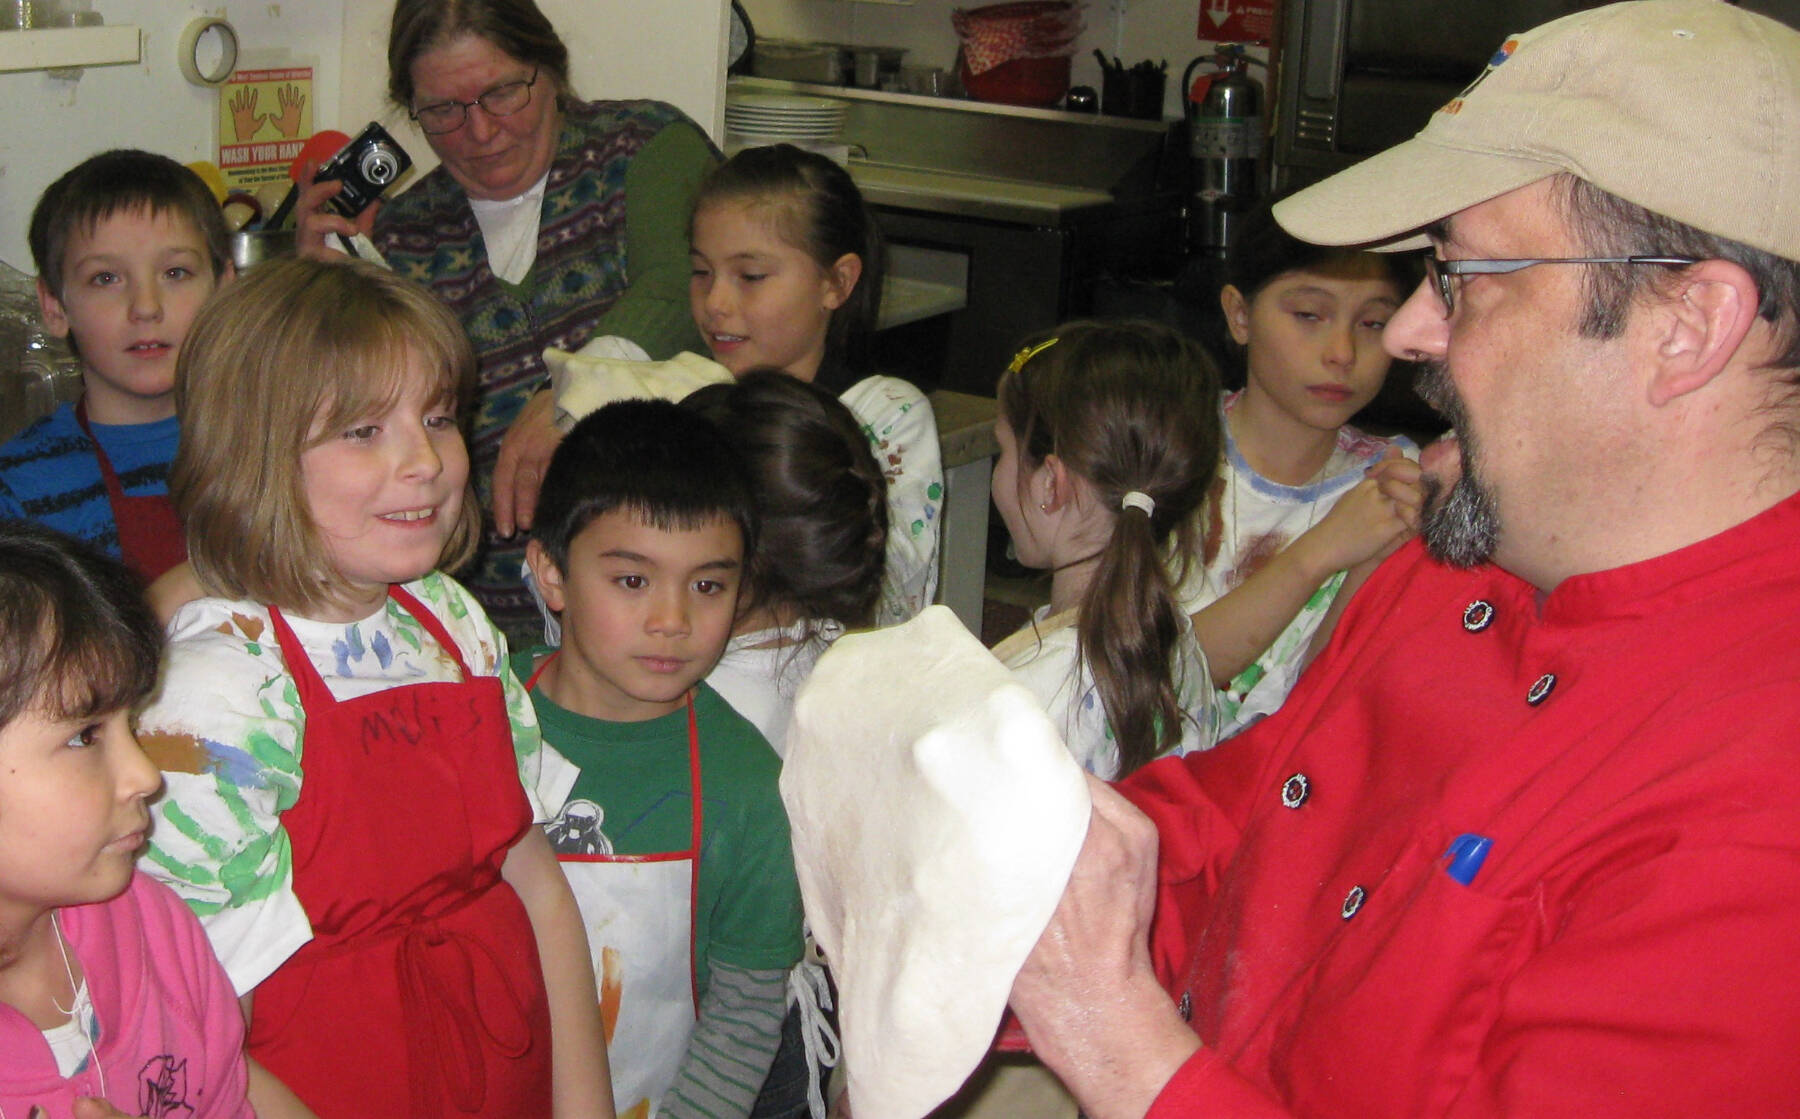 Rosco’s owner, Ross Cameron (right) demonstrates making pizza dough during a kids’ cooking class in 2012 in Ninilchik, Alaska. Photo provided by Ross Cameron